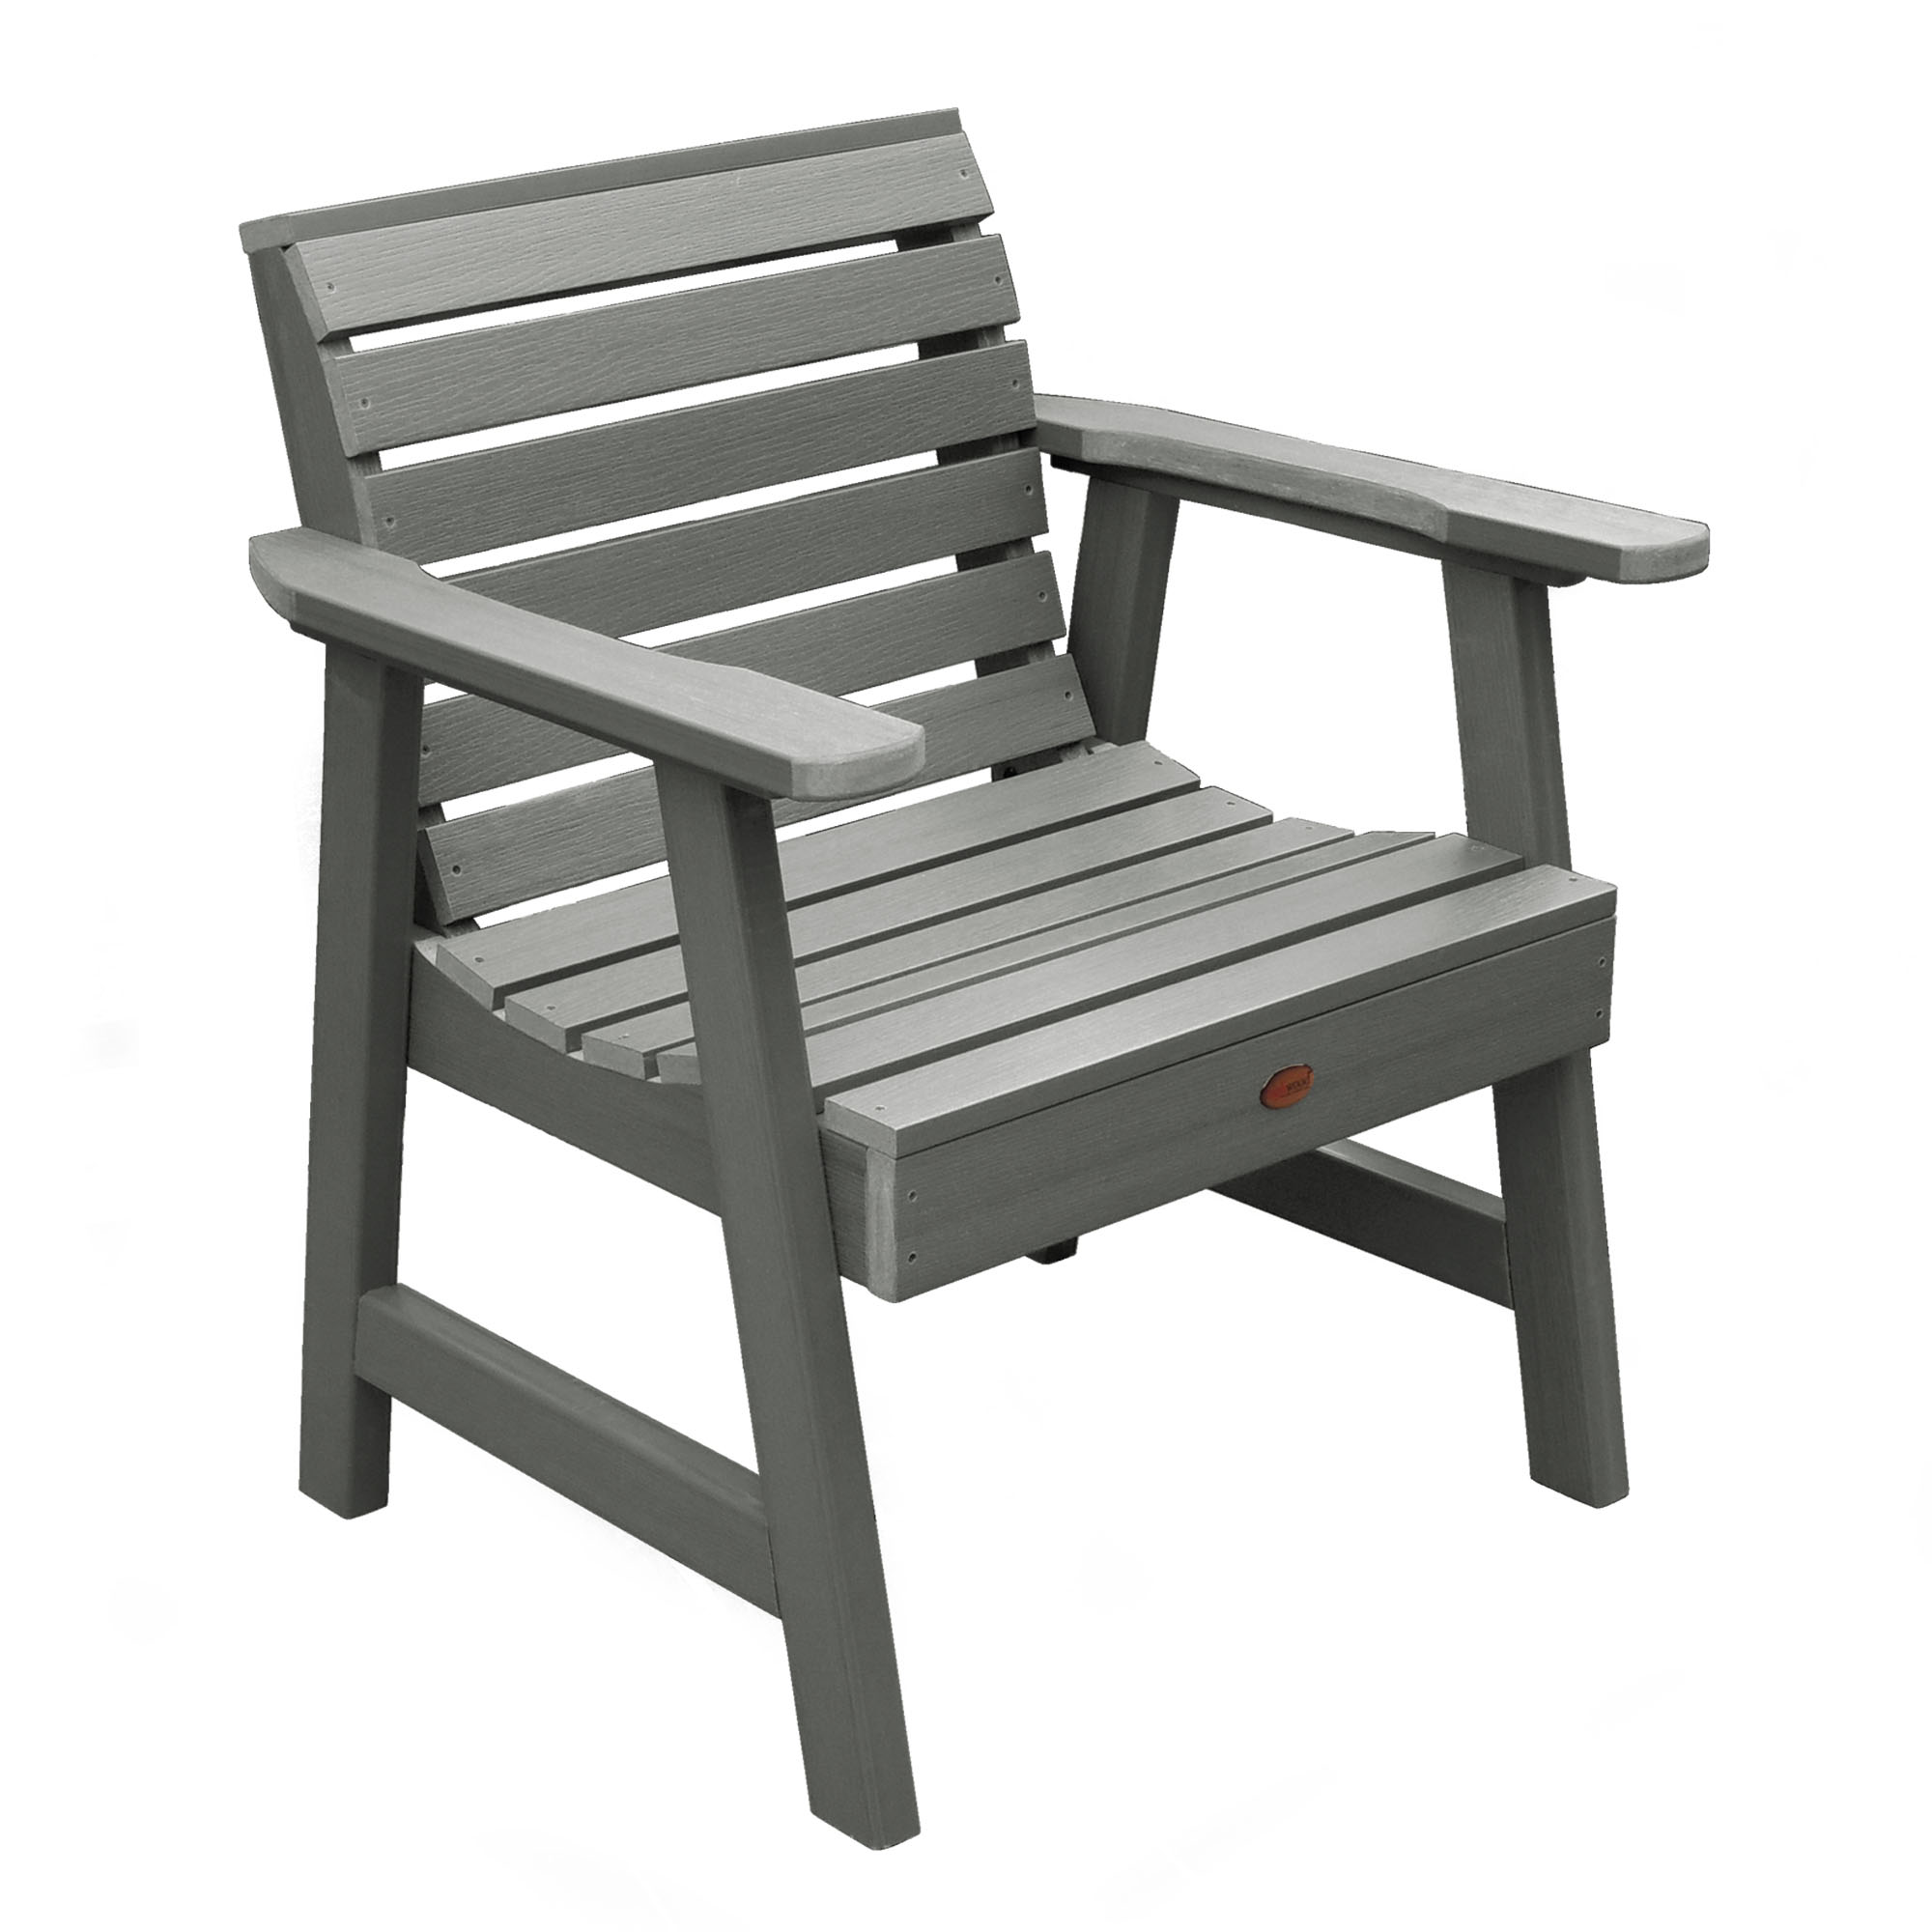 Highwood Weatherly Garden Chair - image 1 of 5